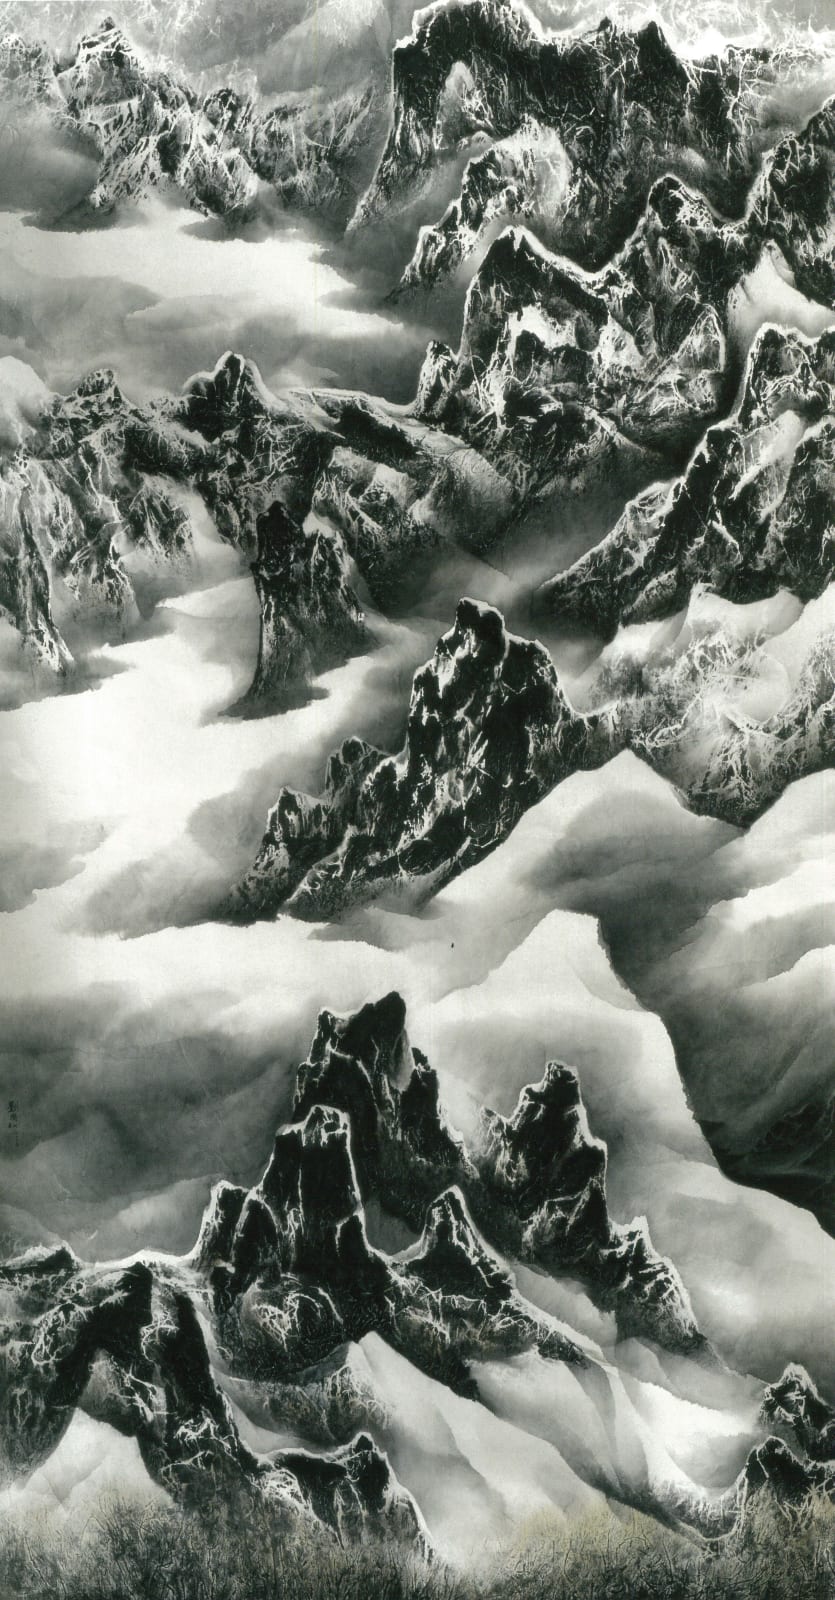 Liu Kuo-Sung 劉國松, Clouds and Mountains in Play 雲與山的遊戲, 2003